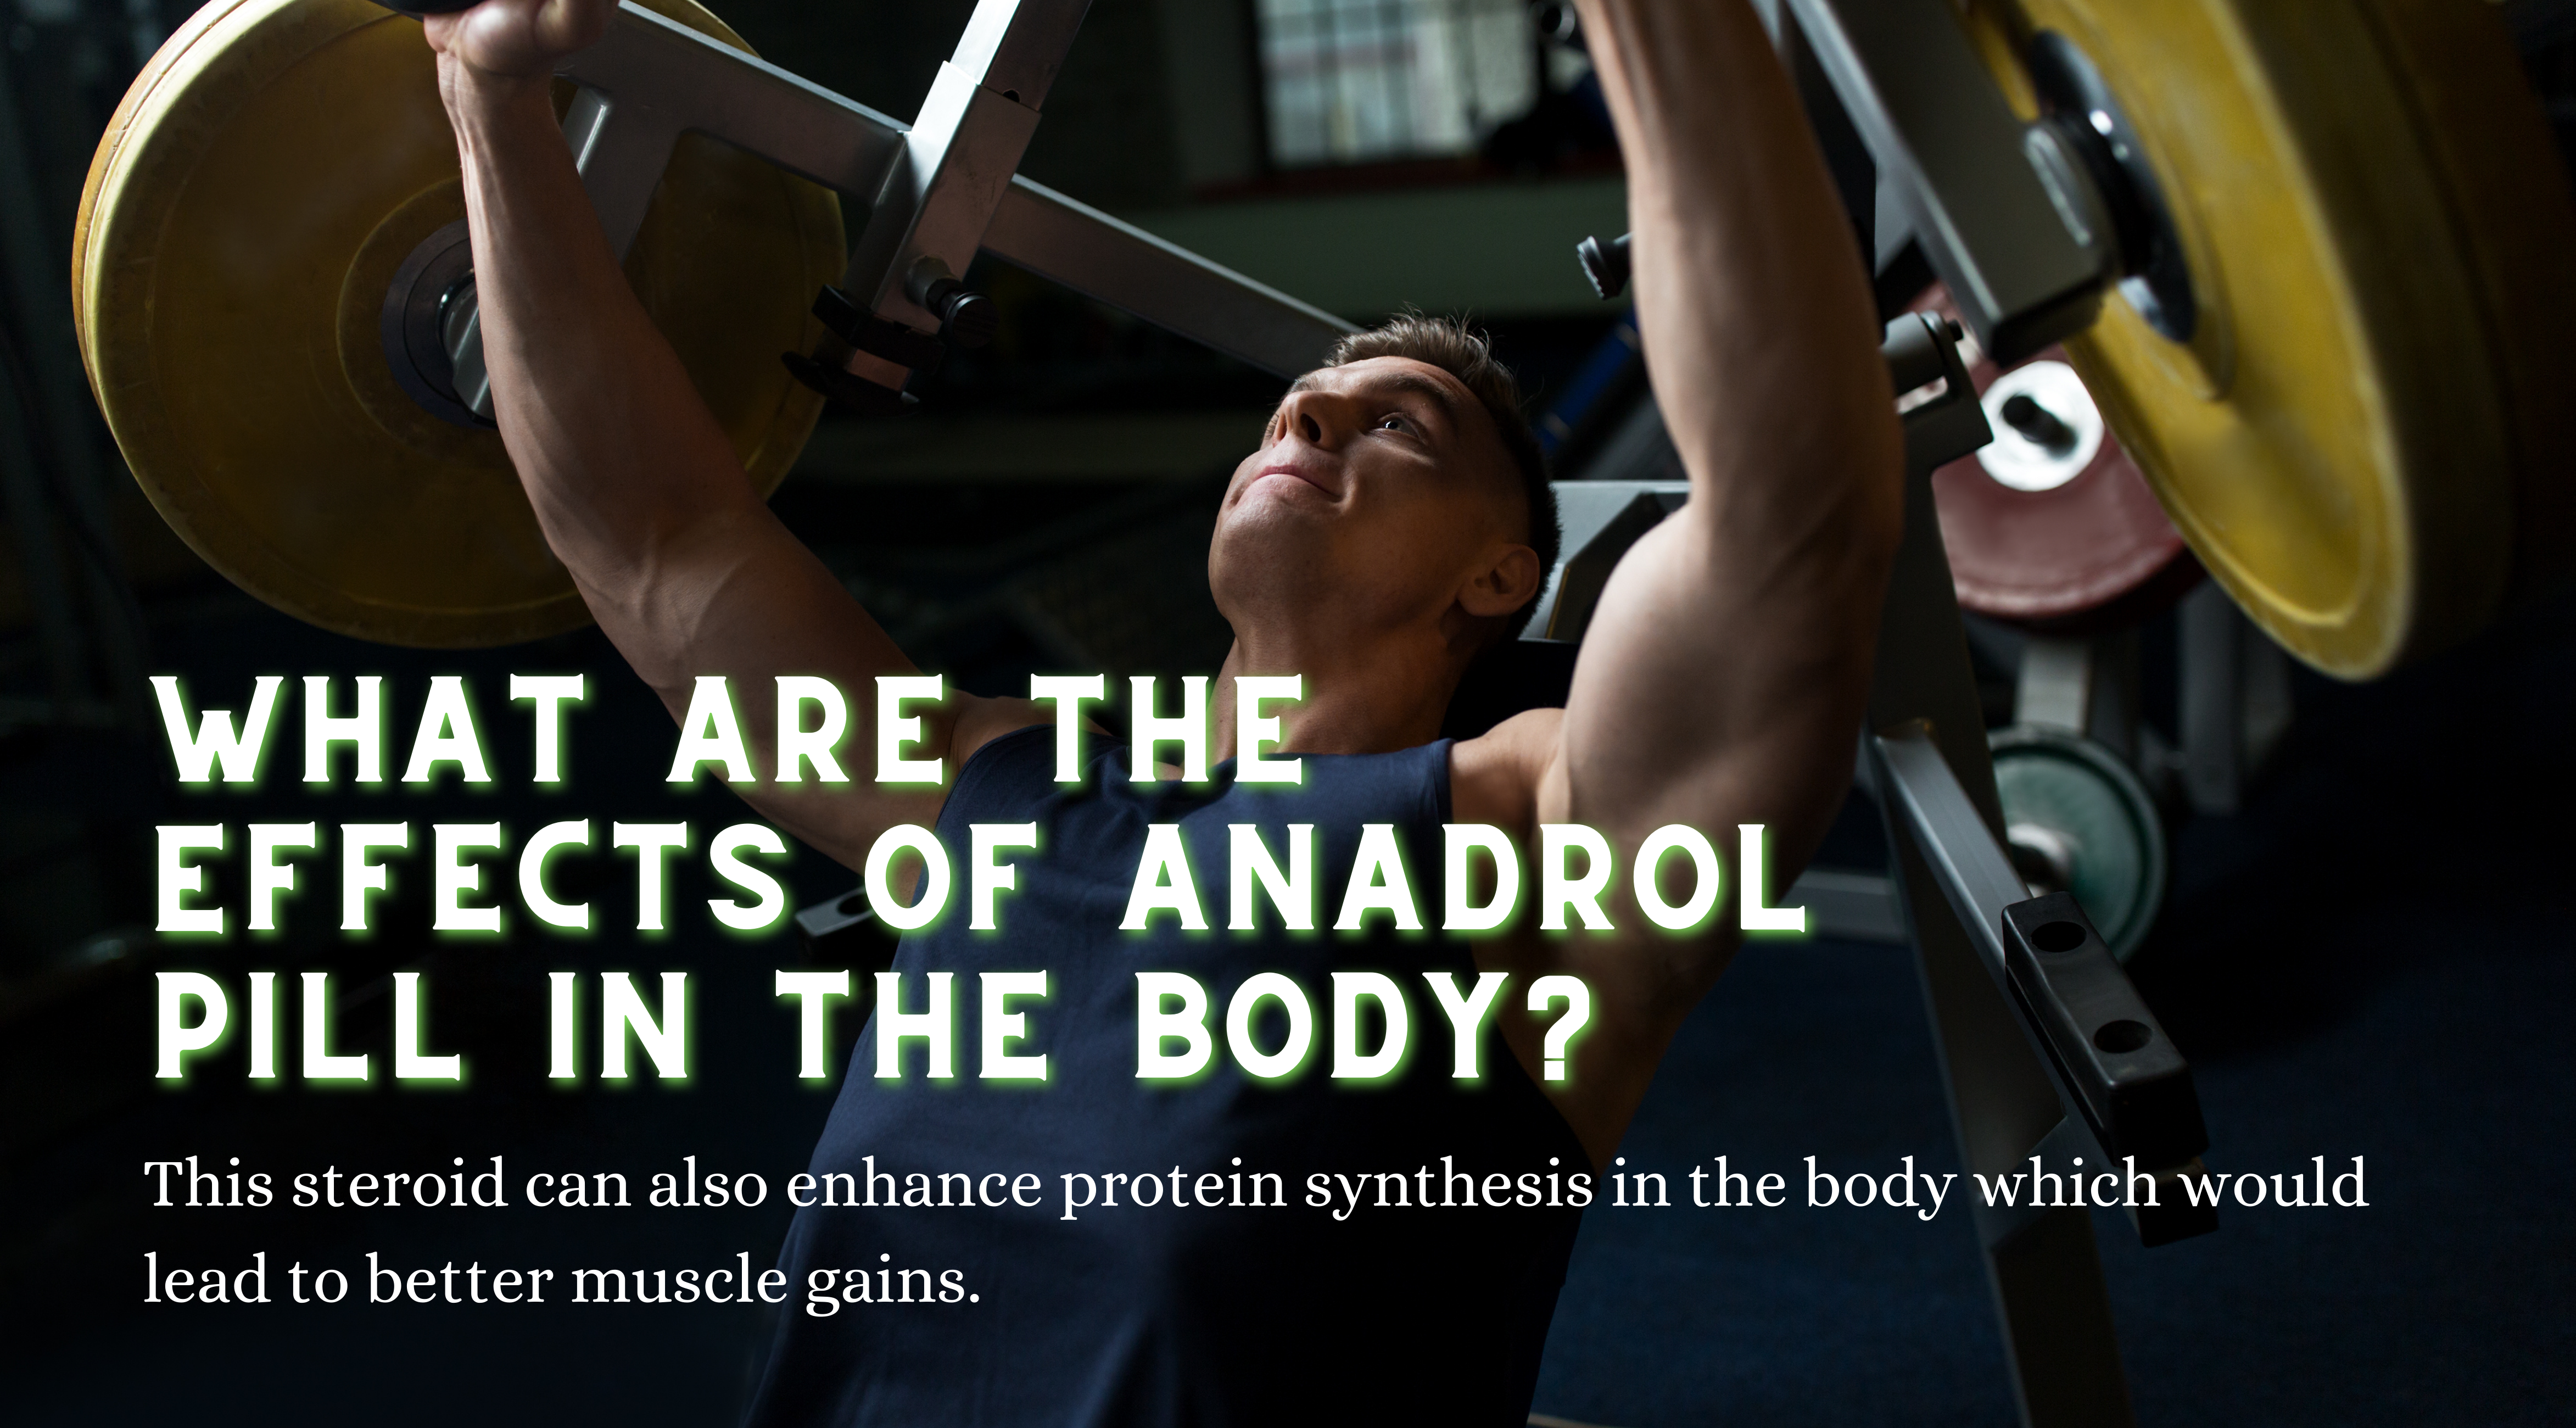 What Are the Effects of Anadrol Pill in the Body?